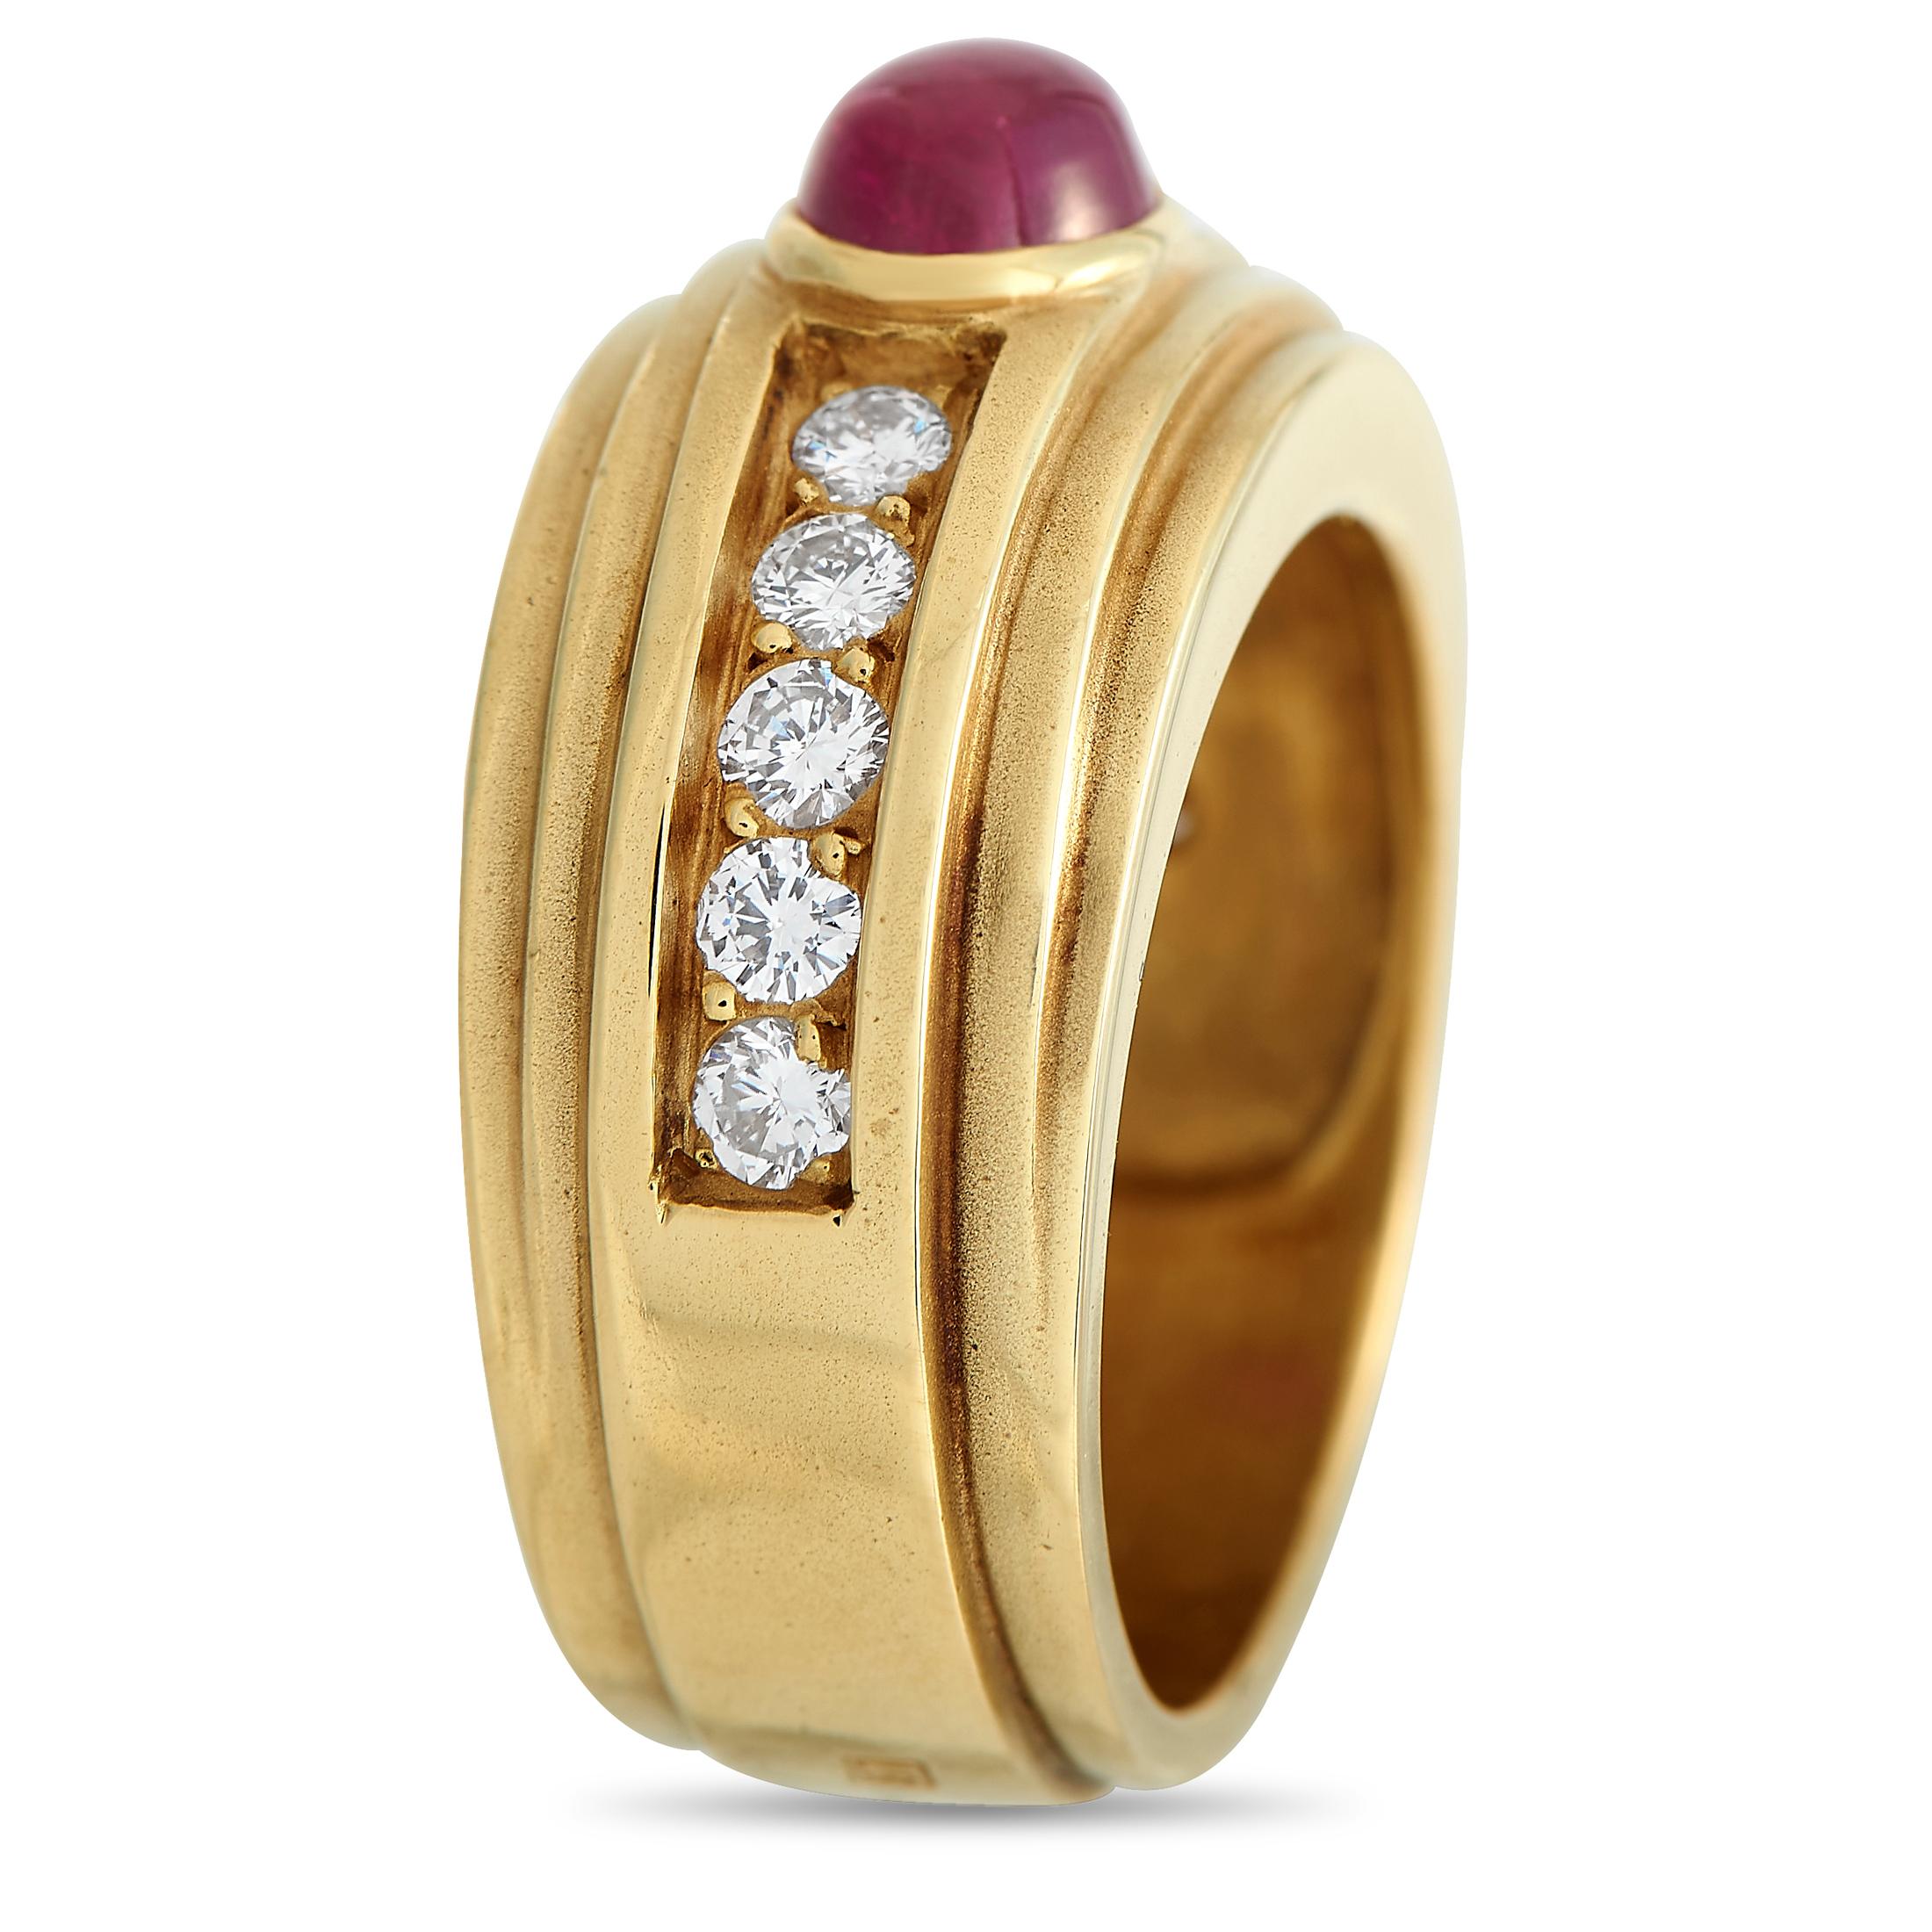 Of classical design, this Kieselstein-Cord yellow gold ring impresses with its timeless beauty and meticulous craftsmanship. The wide-band ring features fluted edges complemented by the brilliance of round diamonds which are prong-set on a deep